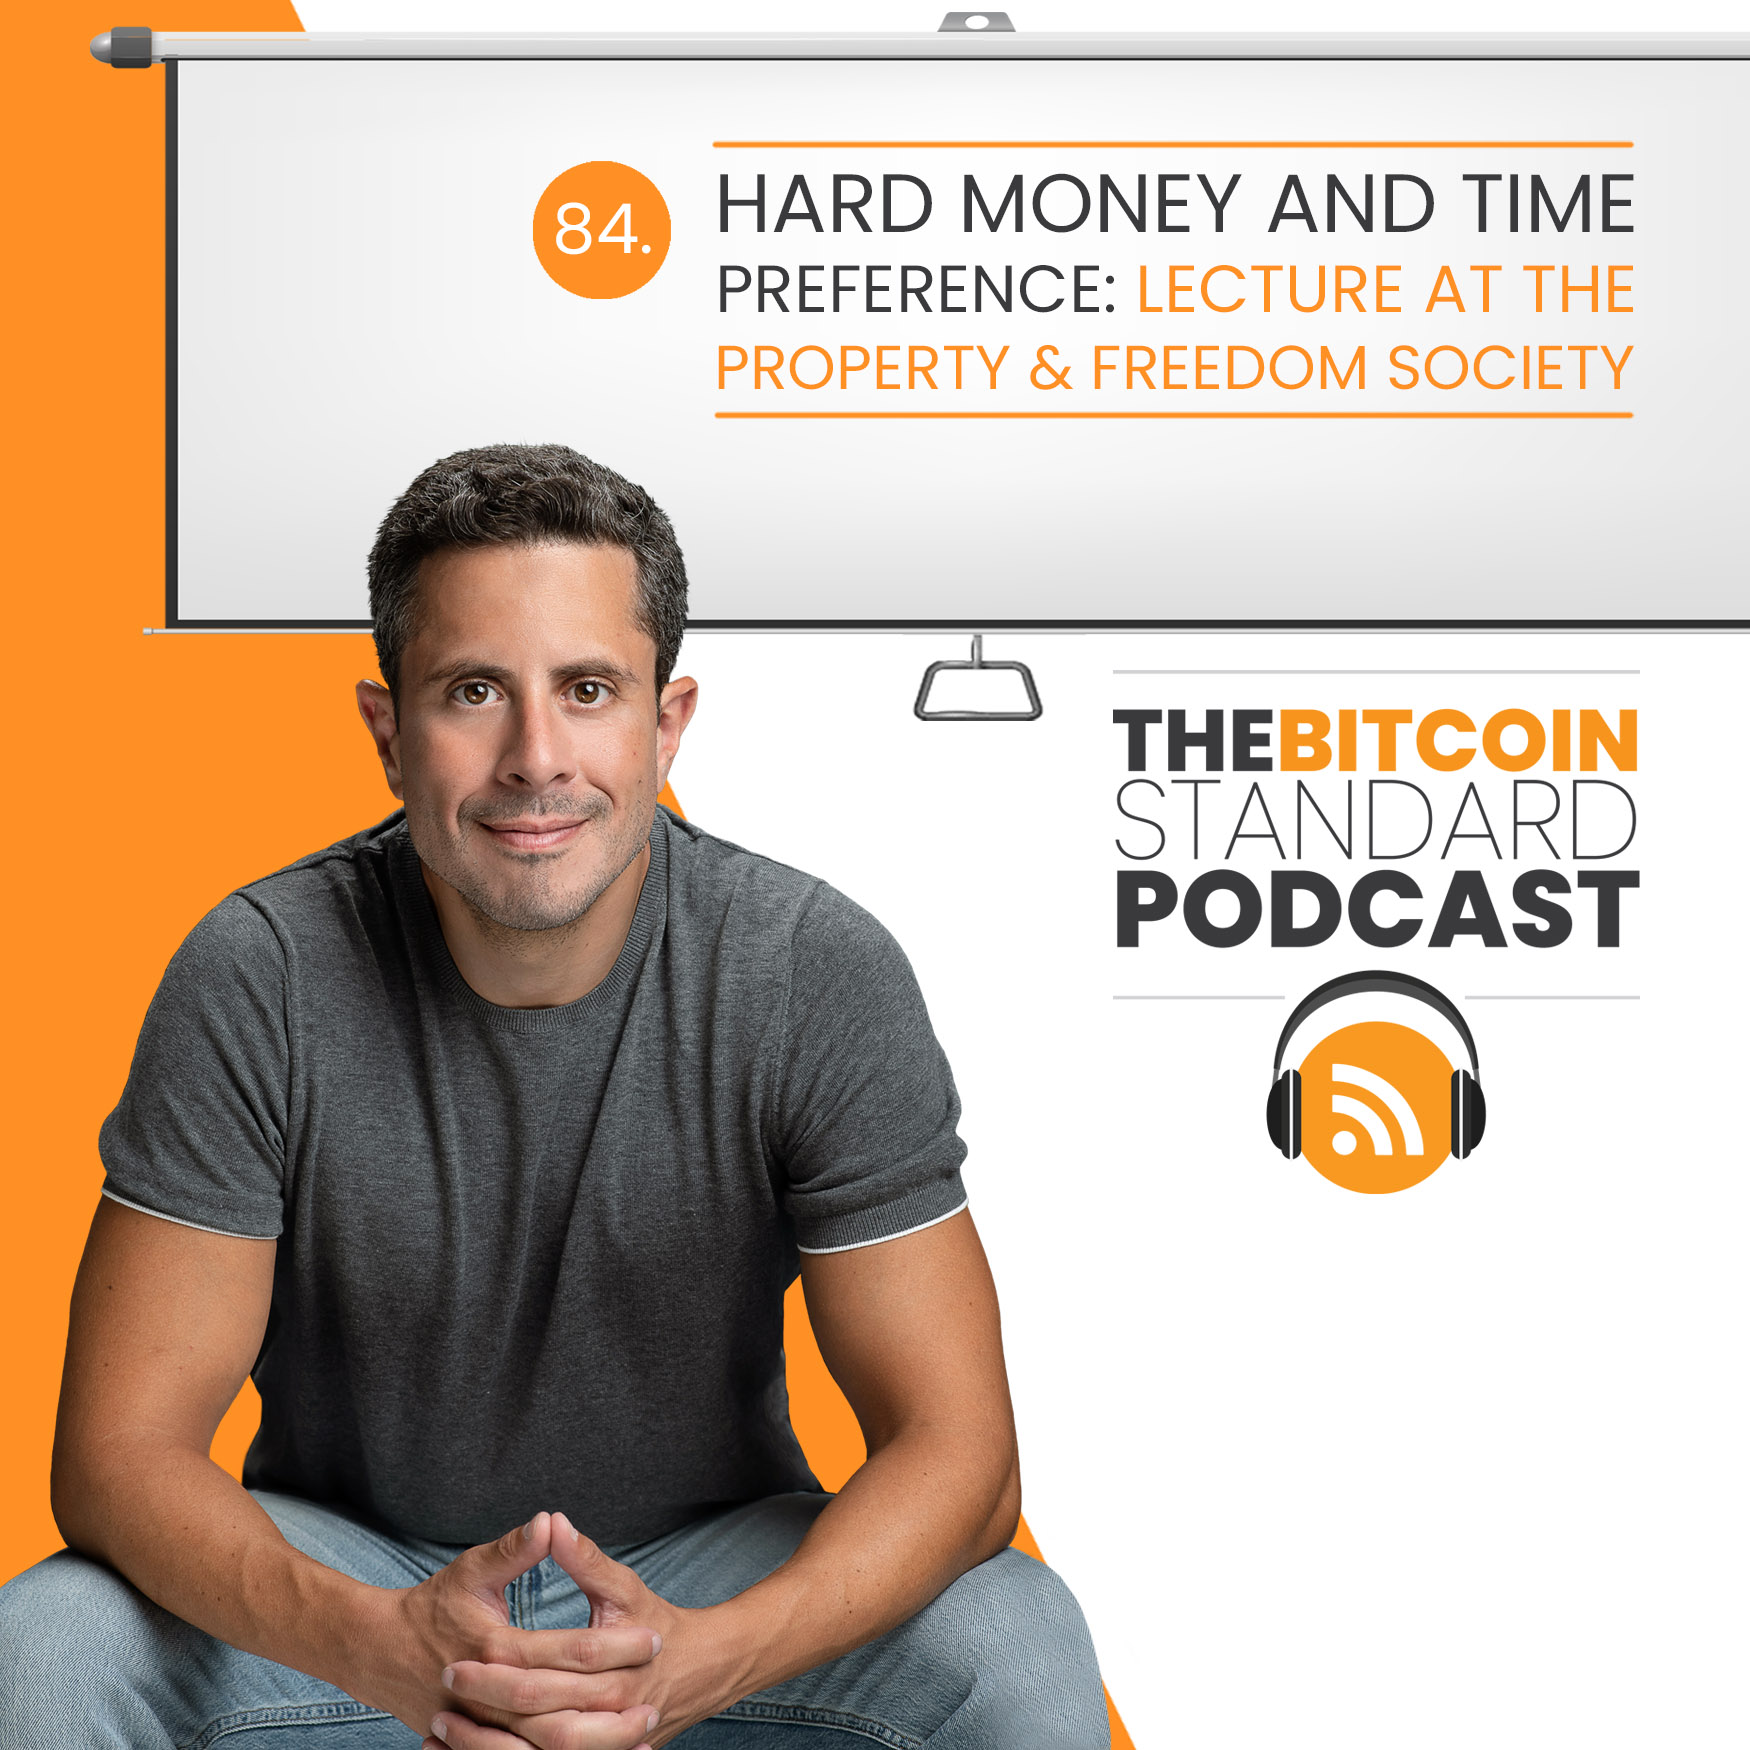 84. Hard money and time preference: Lecture at the Property & Freedom Society